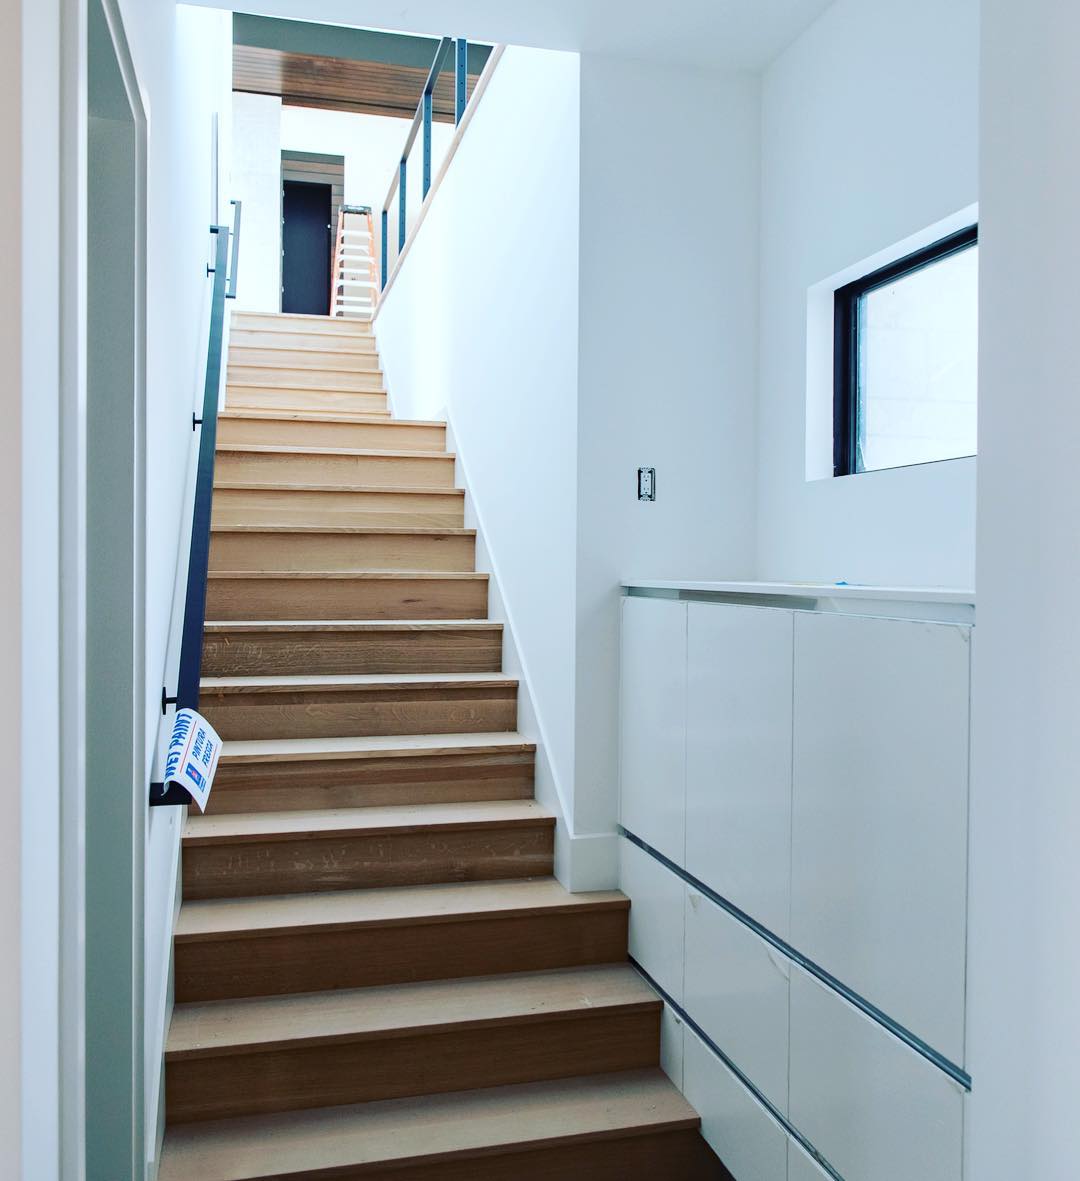 In other parts of the world they would call this basement access. In Texas it’s our clients stairway to possibilities!